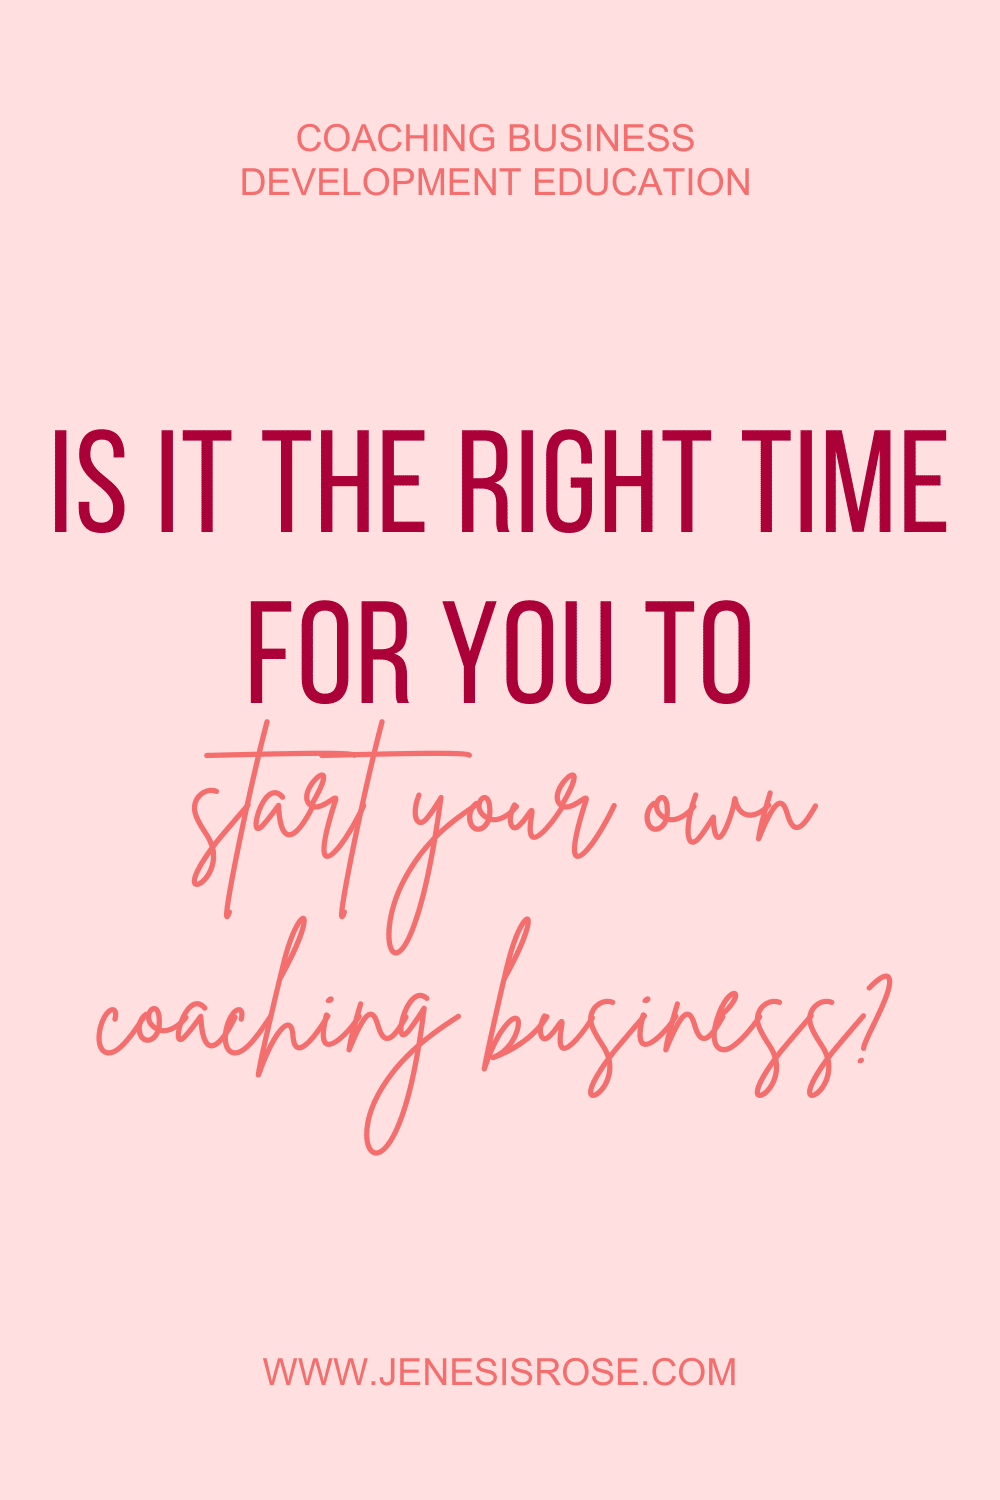 Is it the right time for you to start your own coaching business?